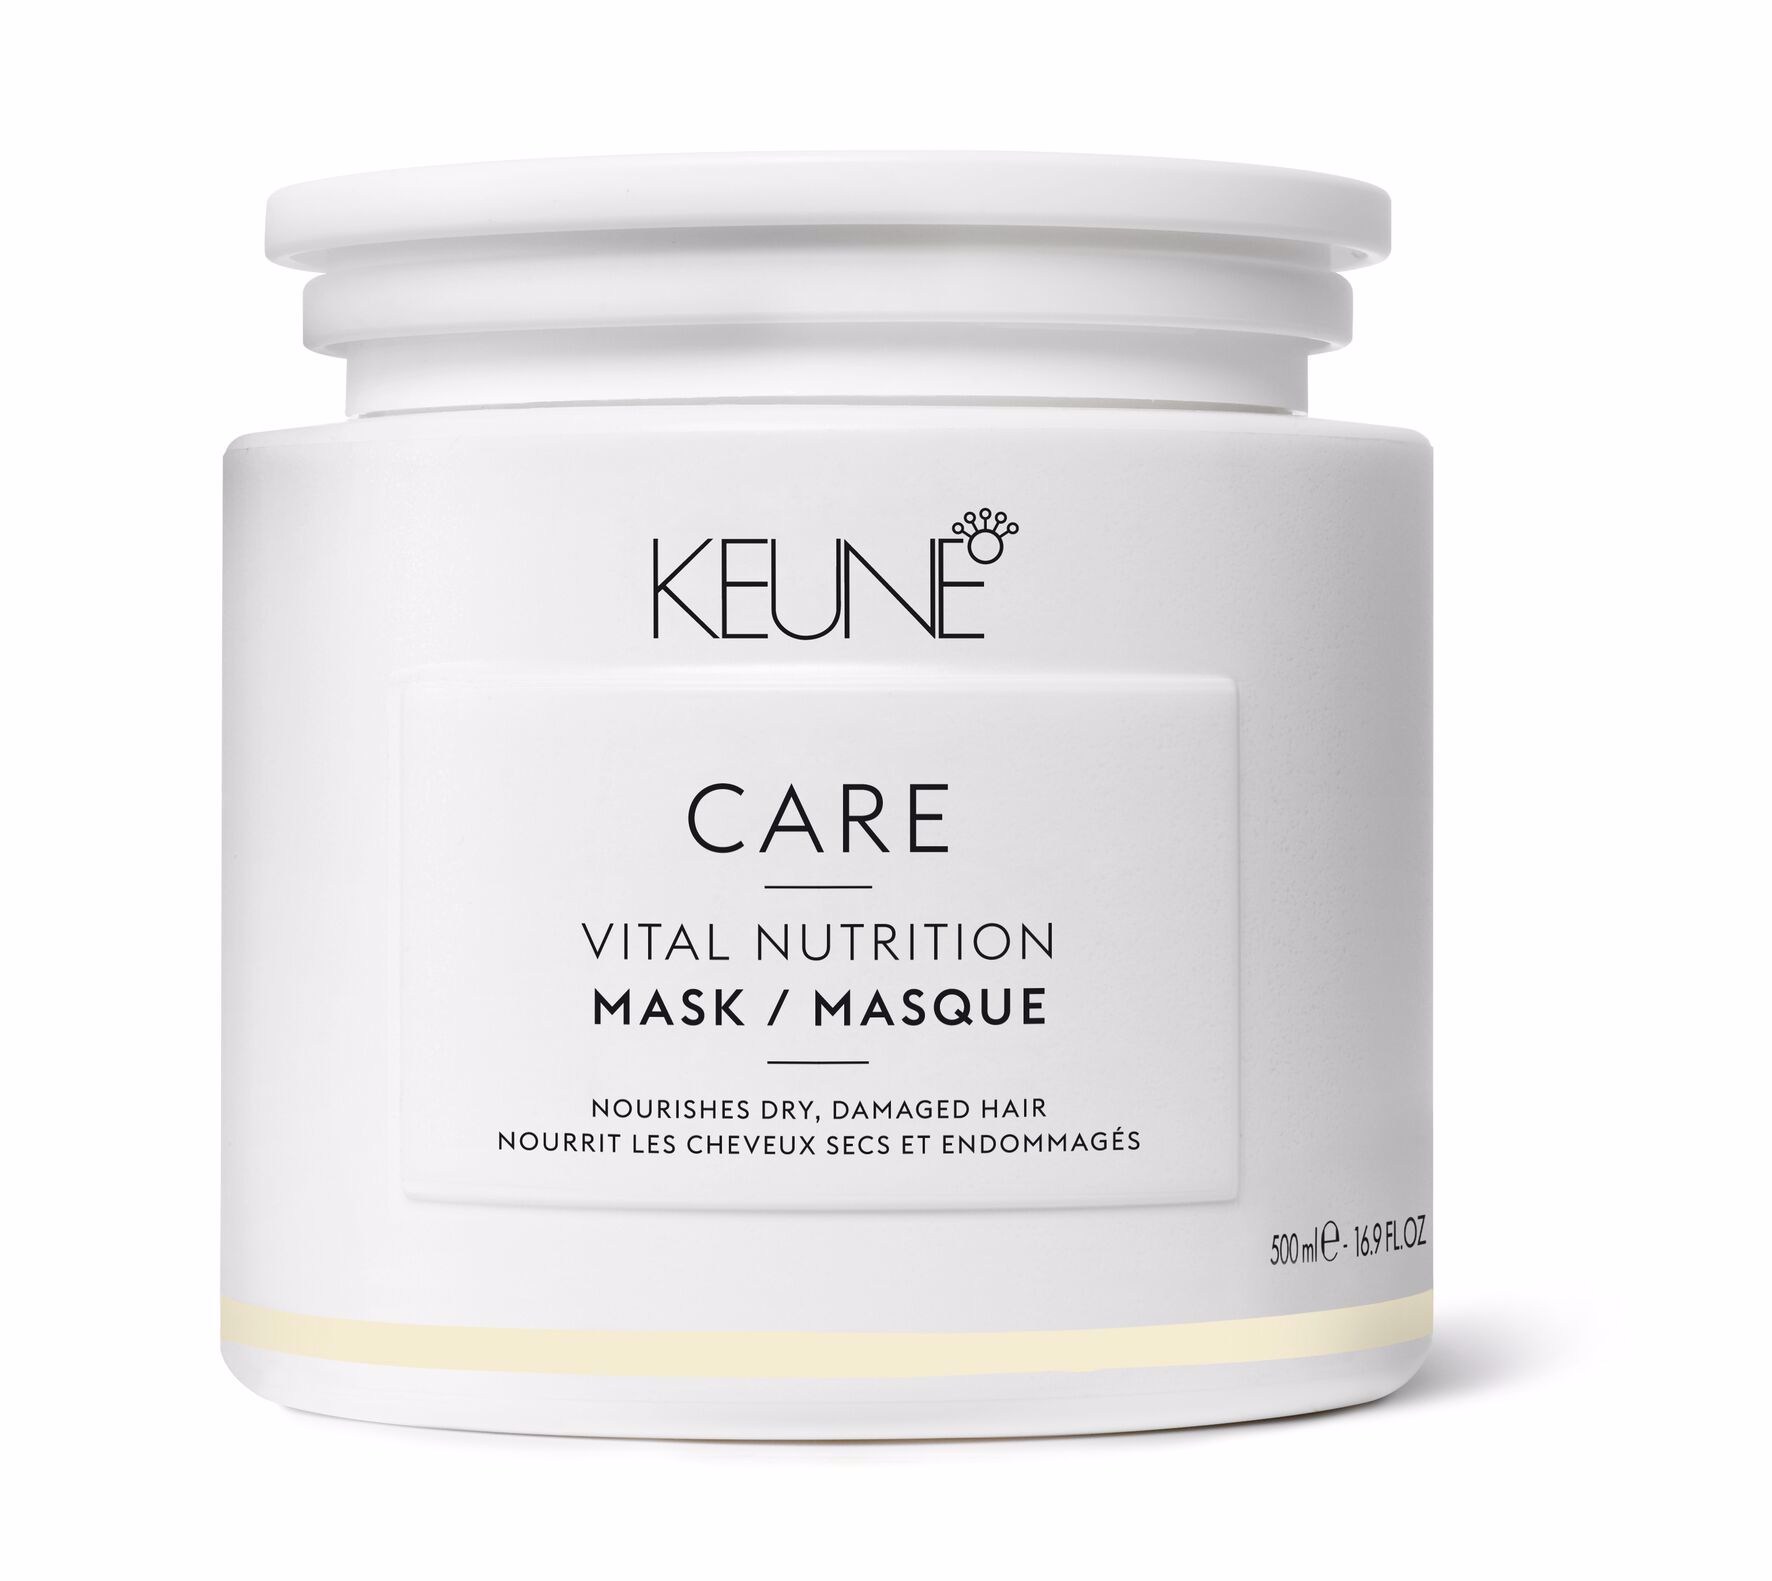 Ideal for dry, dull, and damaged hair, this is the Vital Nutrition Mask that smooths, strengthens, and adds shine. Hair mask available on keune.ch.